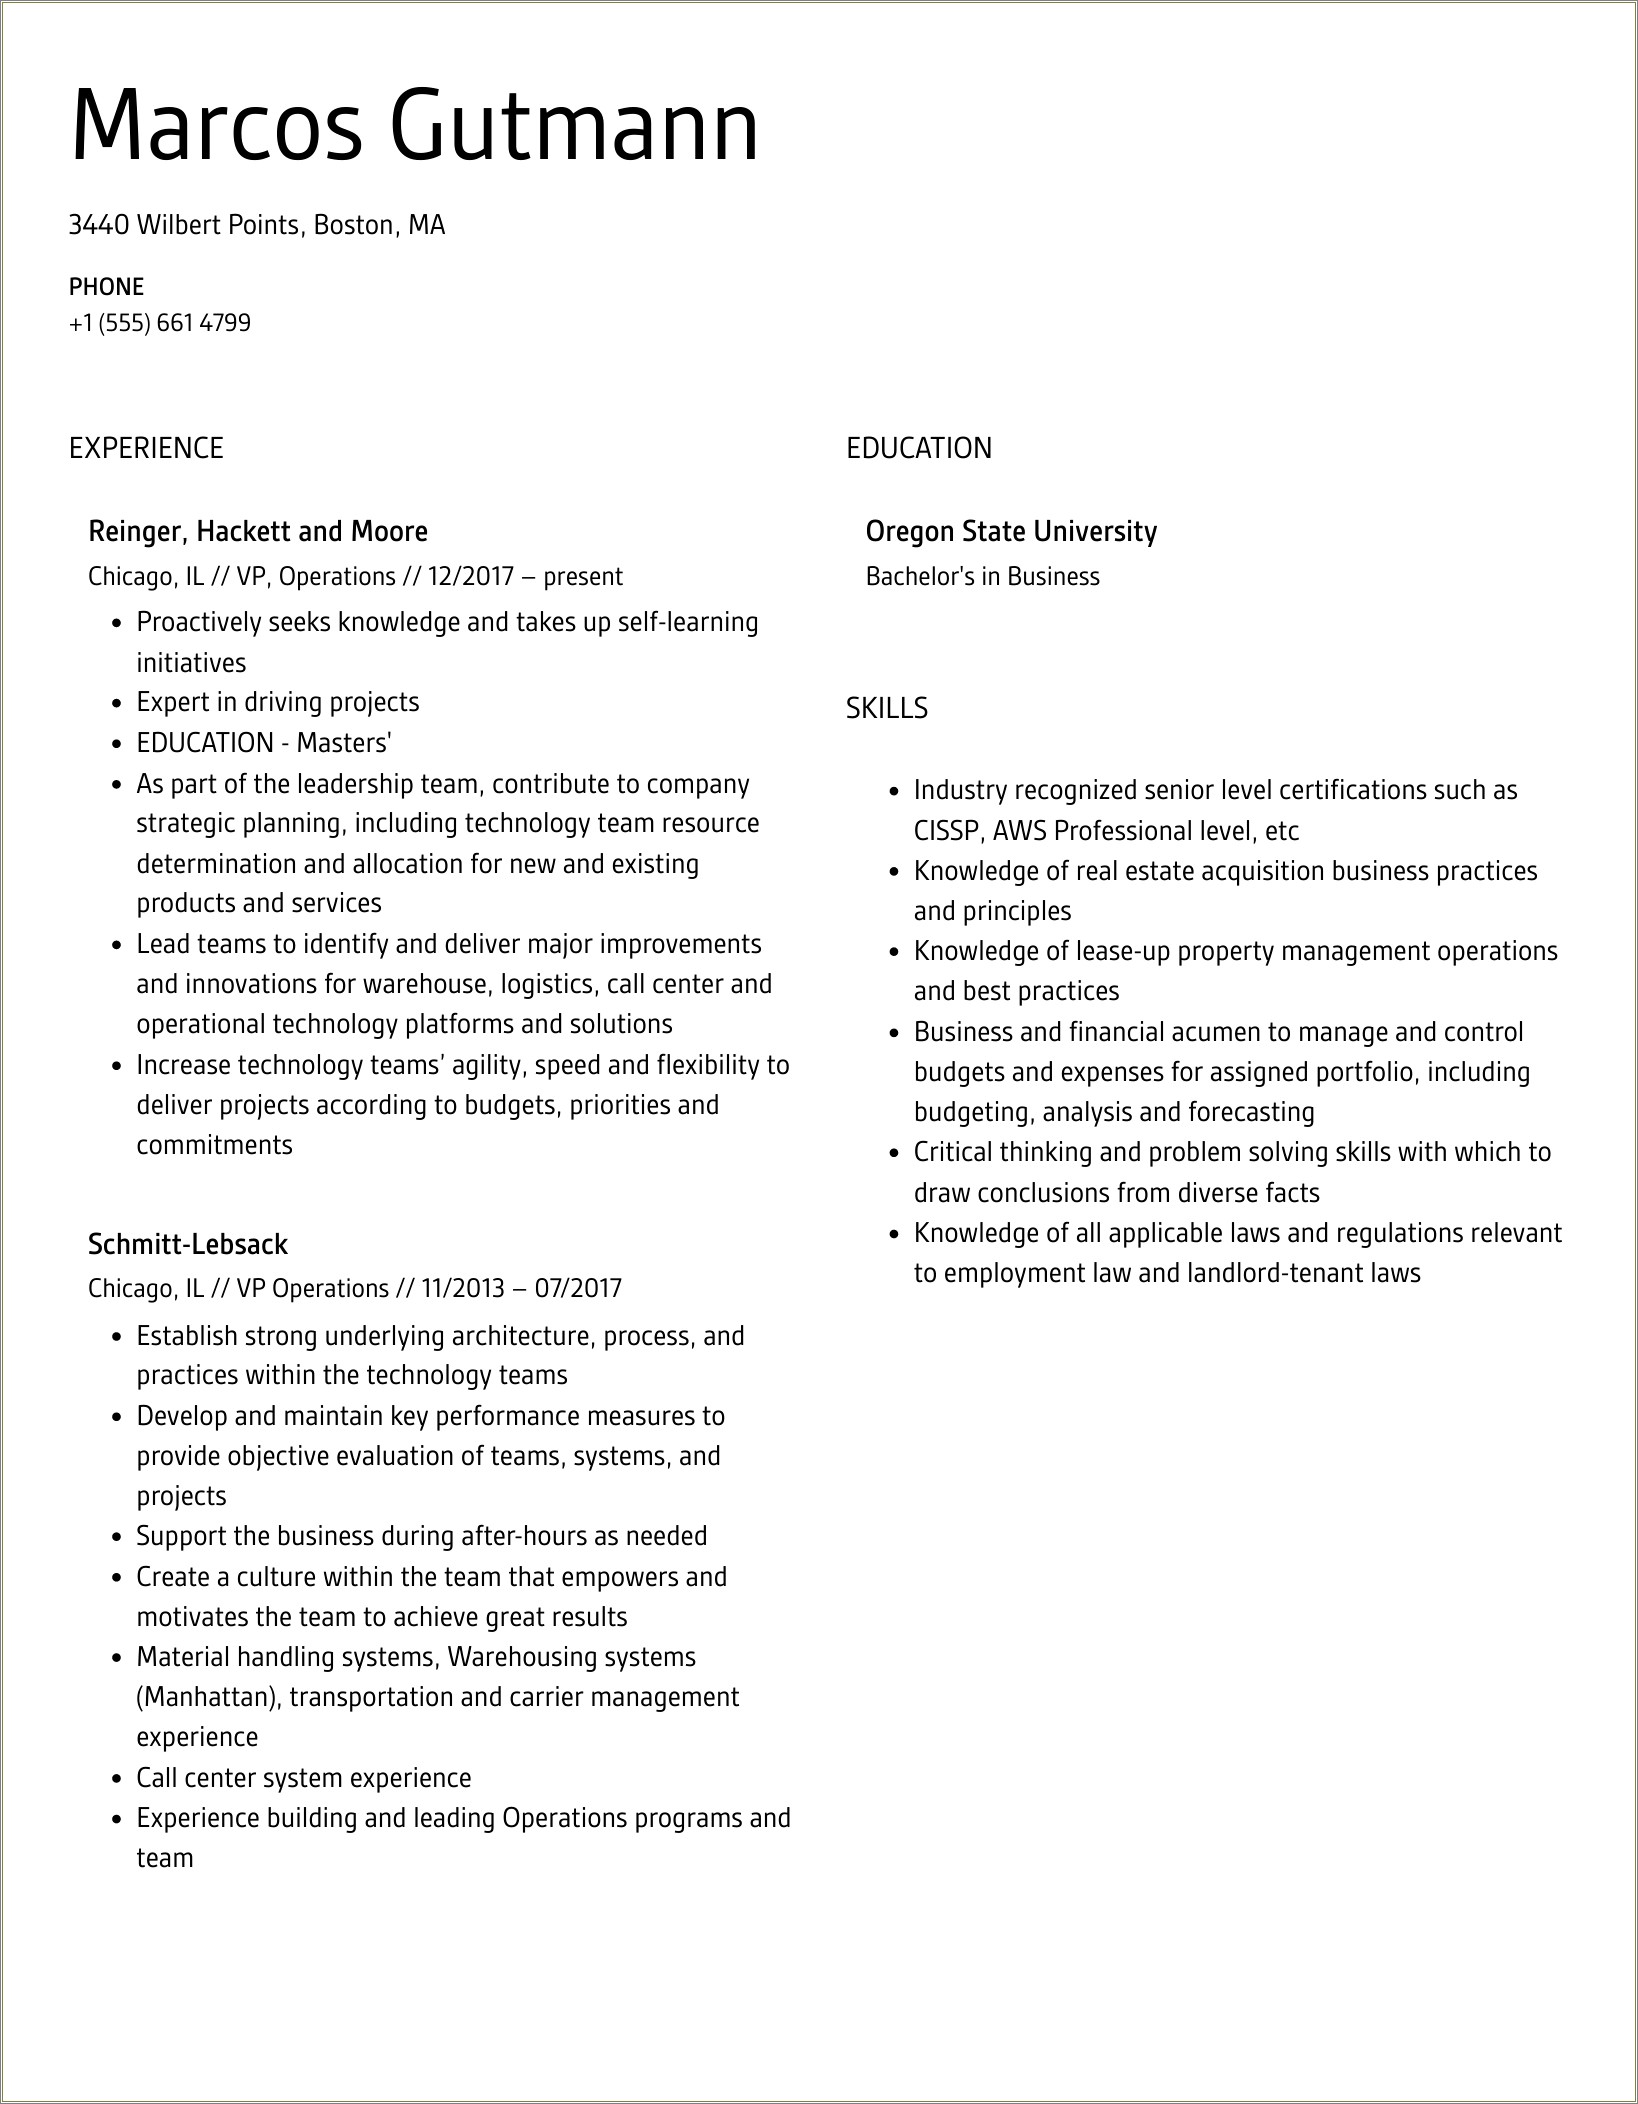 Resume Summary For Vp Of Operations